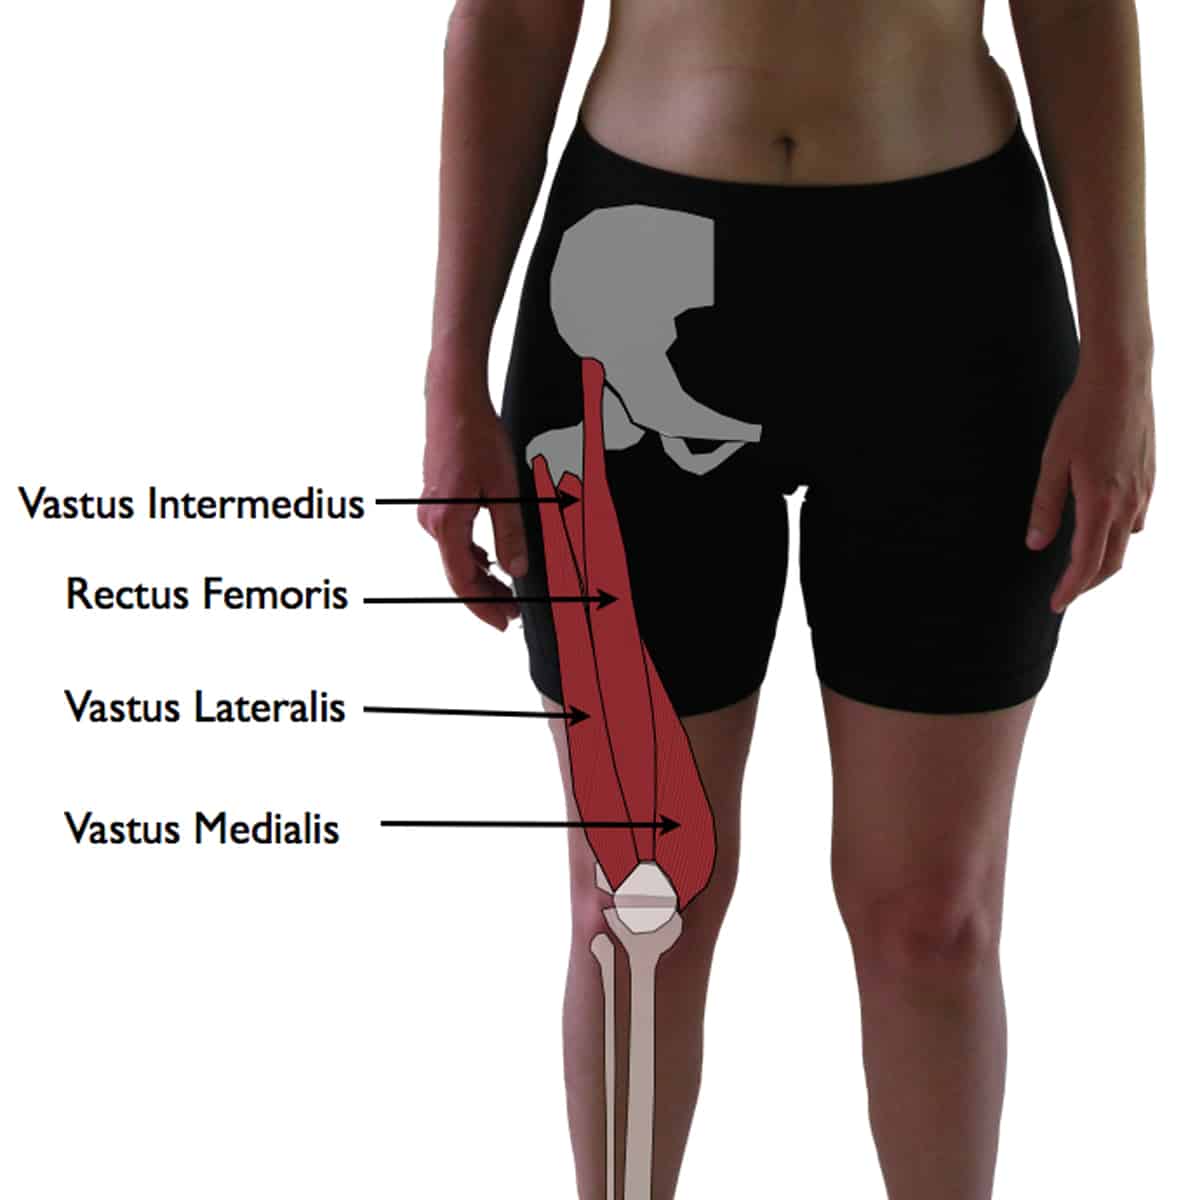 Vastus Lateralis Trigger Points: The Knee Pain Trigger Points